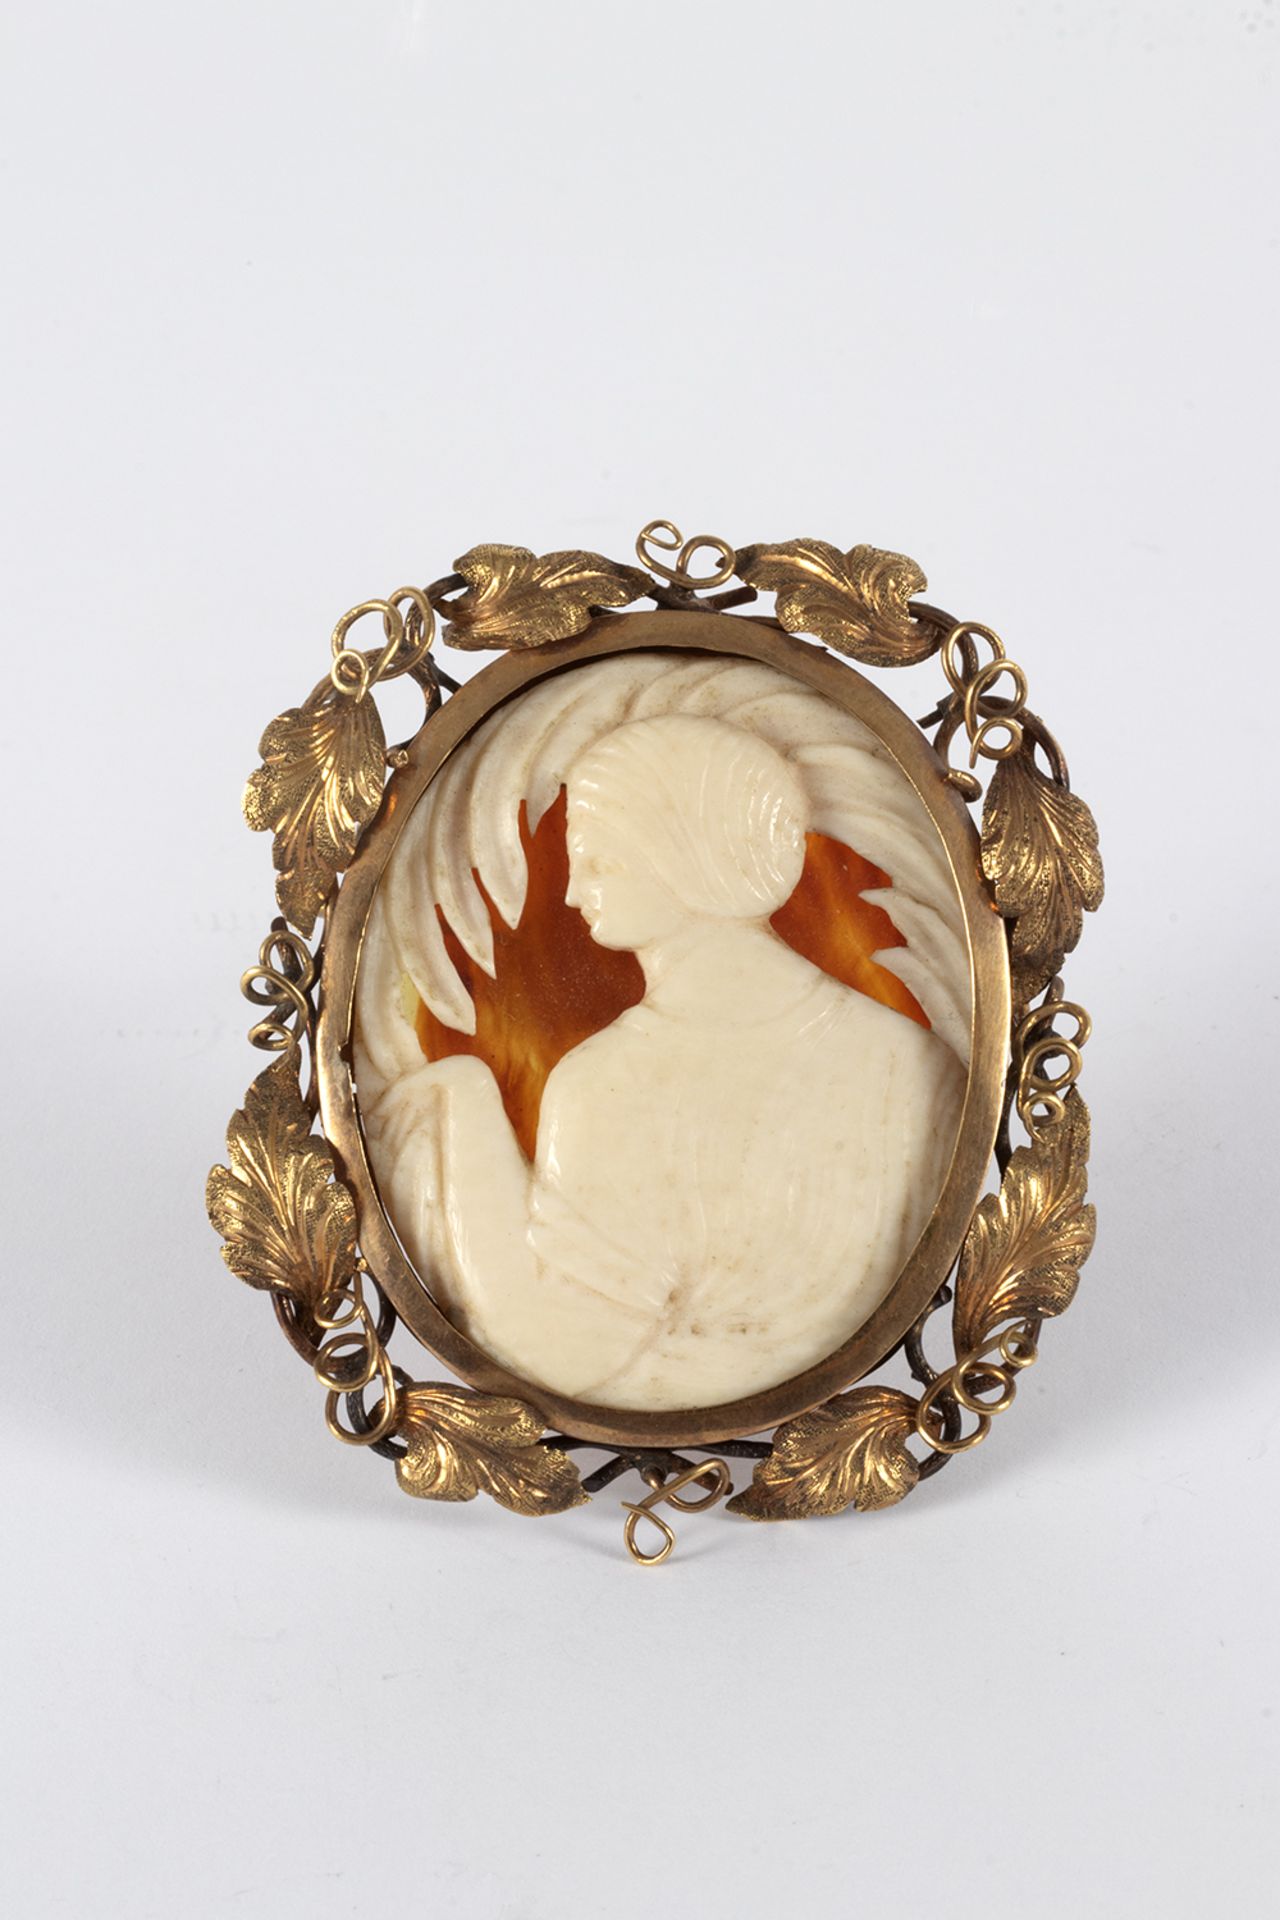 Noucentista ivory gold and tortoiseshell brooch.